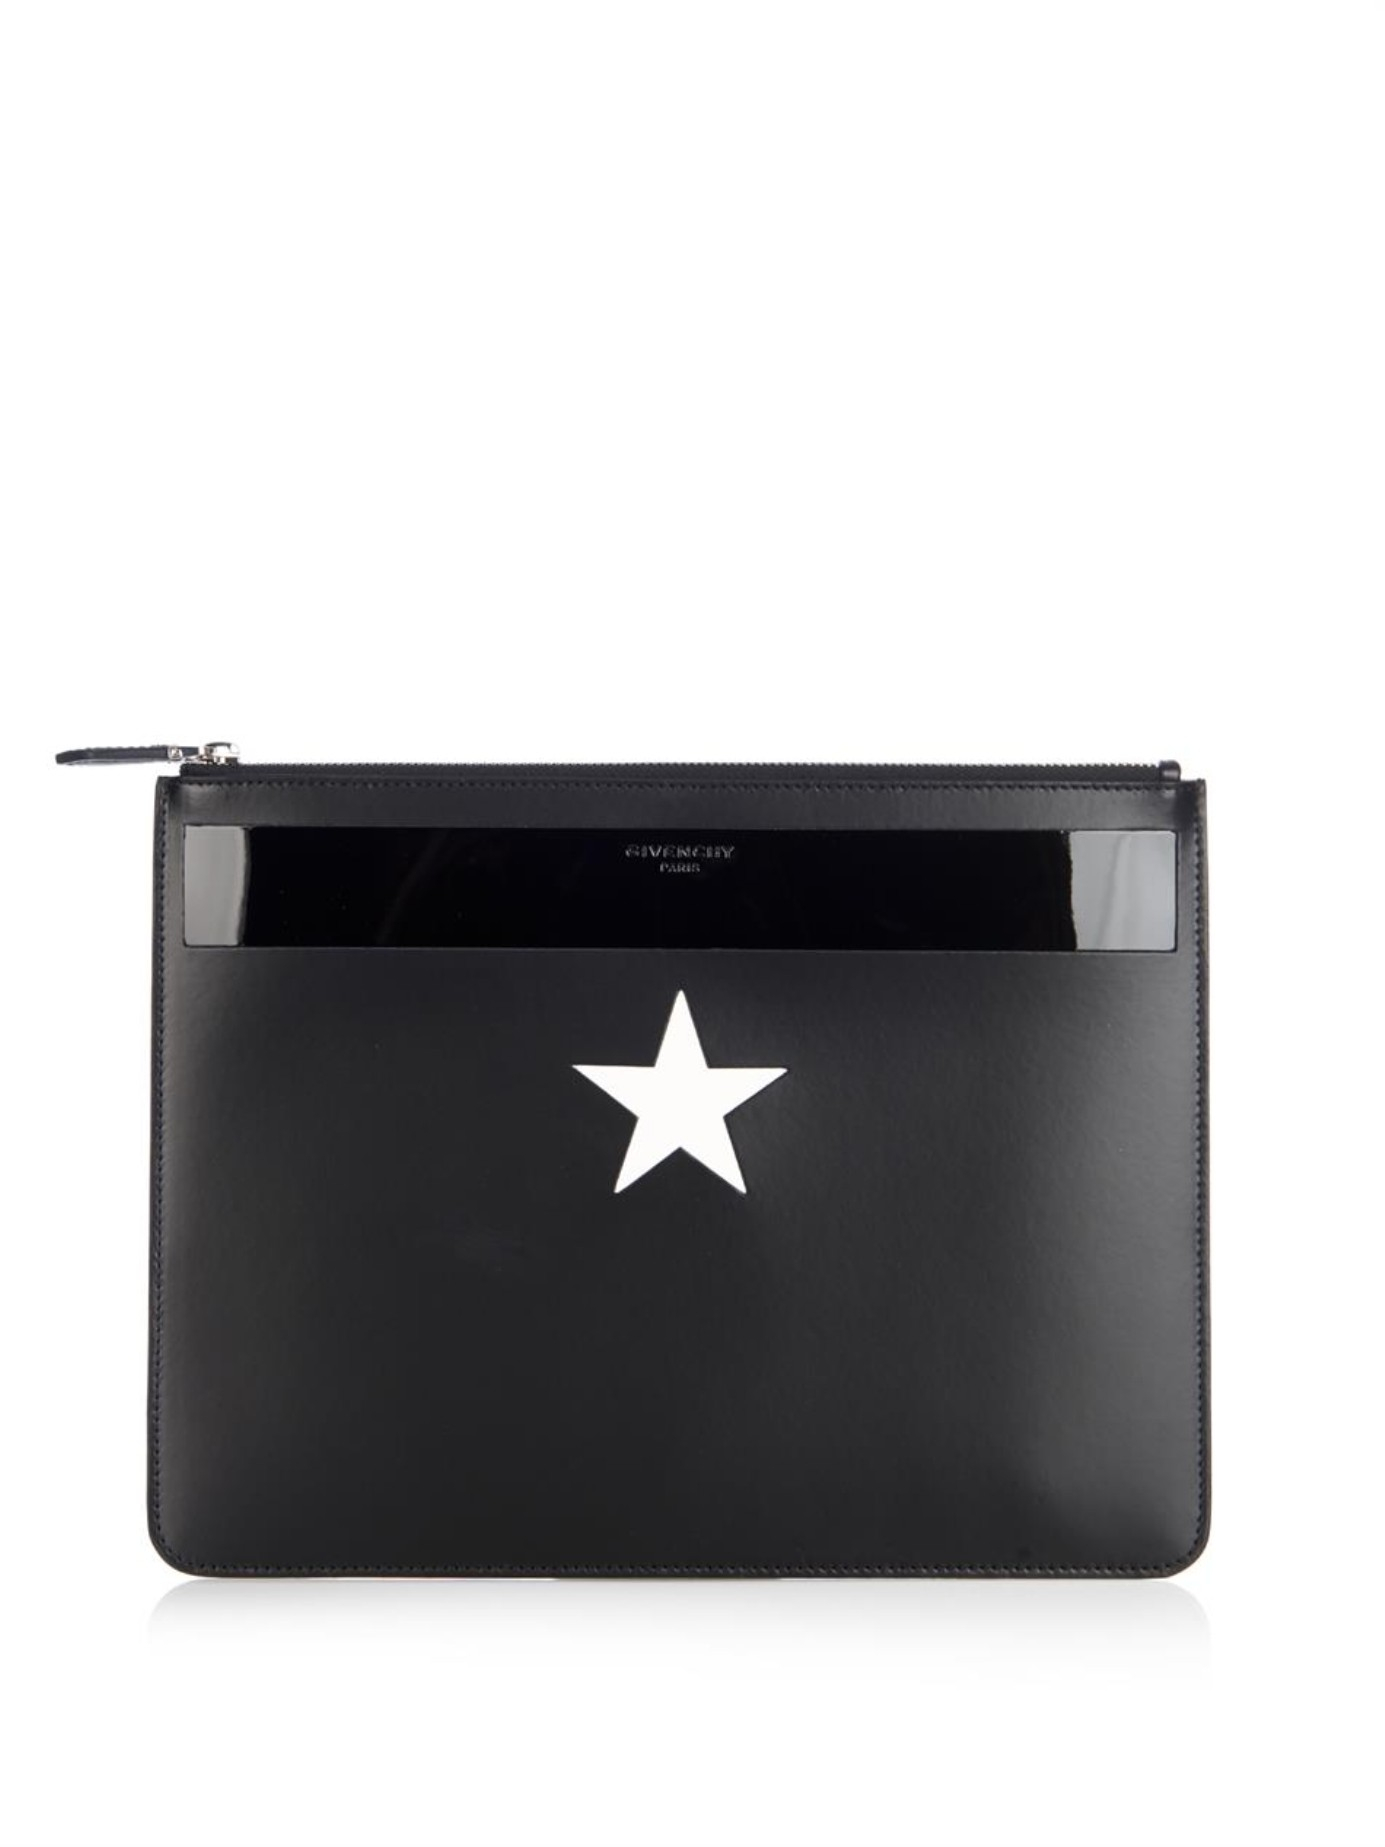 Lyst - Givenchy Star And Stripe Leather Pouch in Black for Men